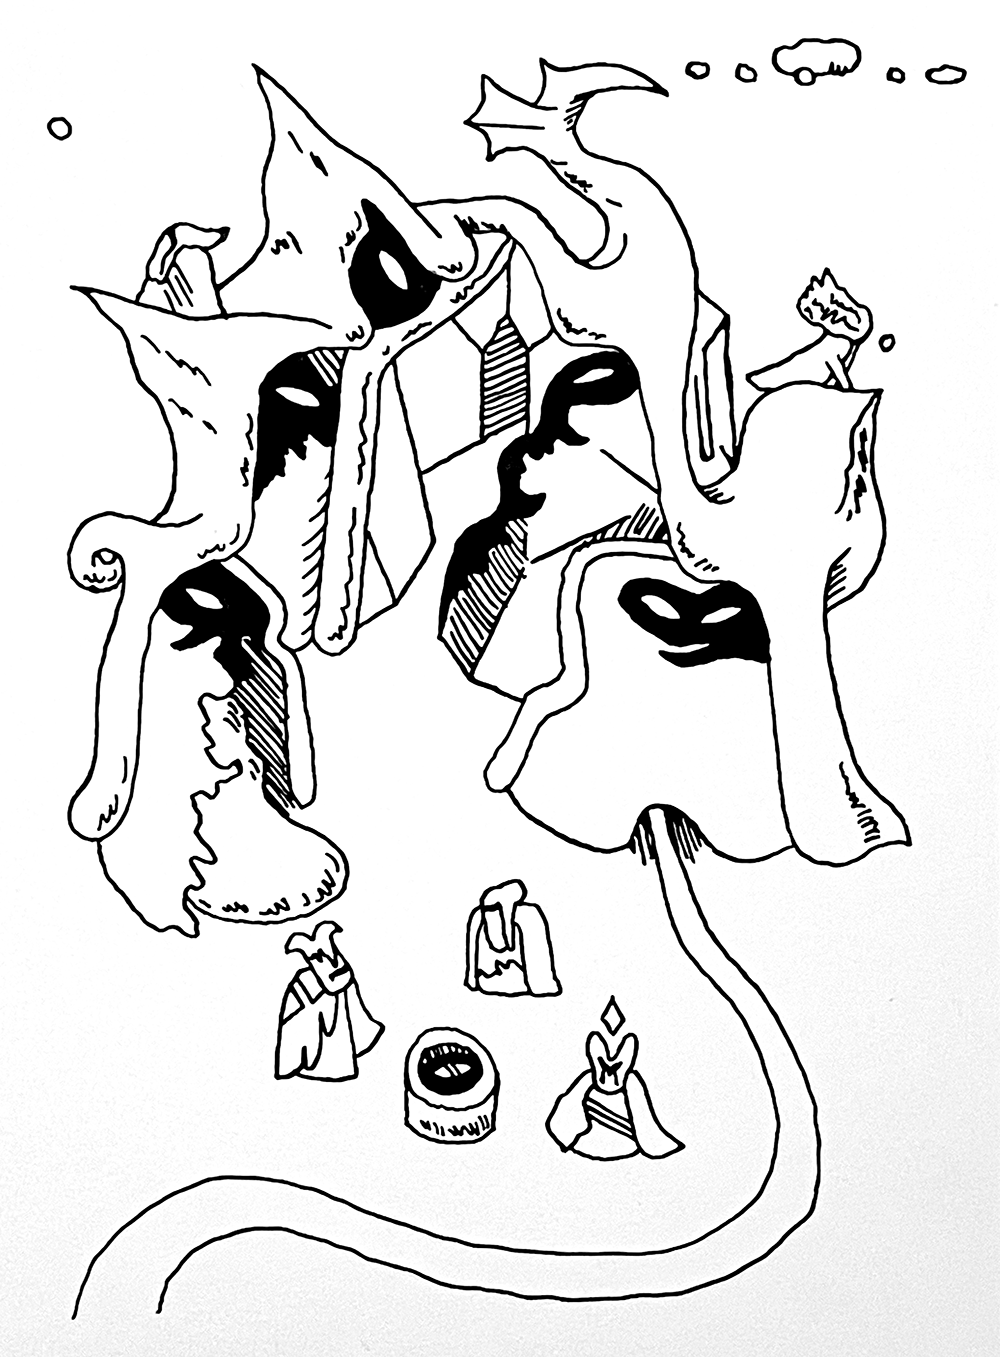 2022 Meeting of the Miizzz Minds india ink drawing